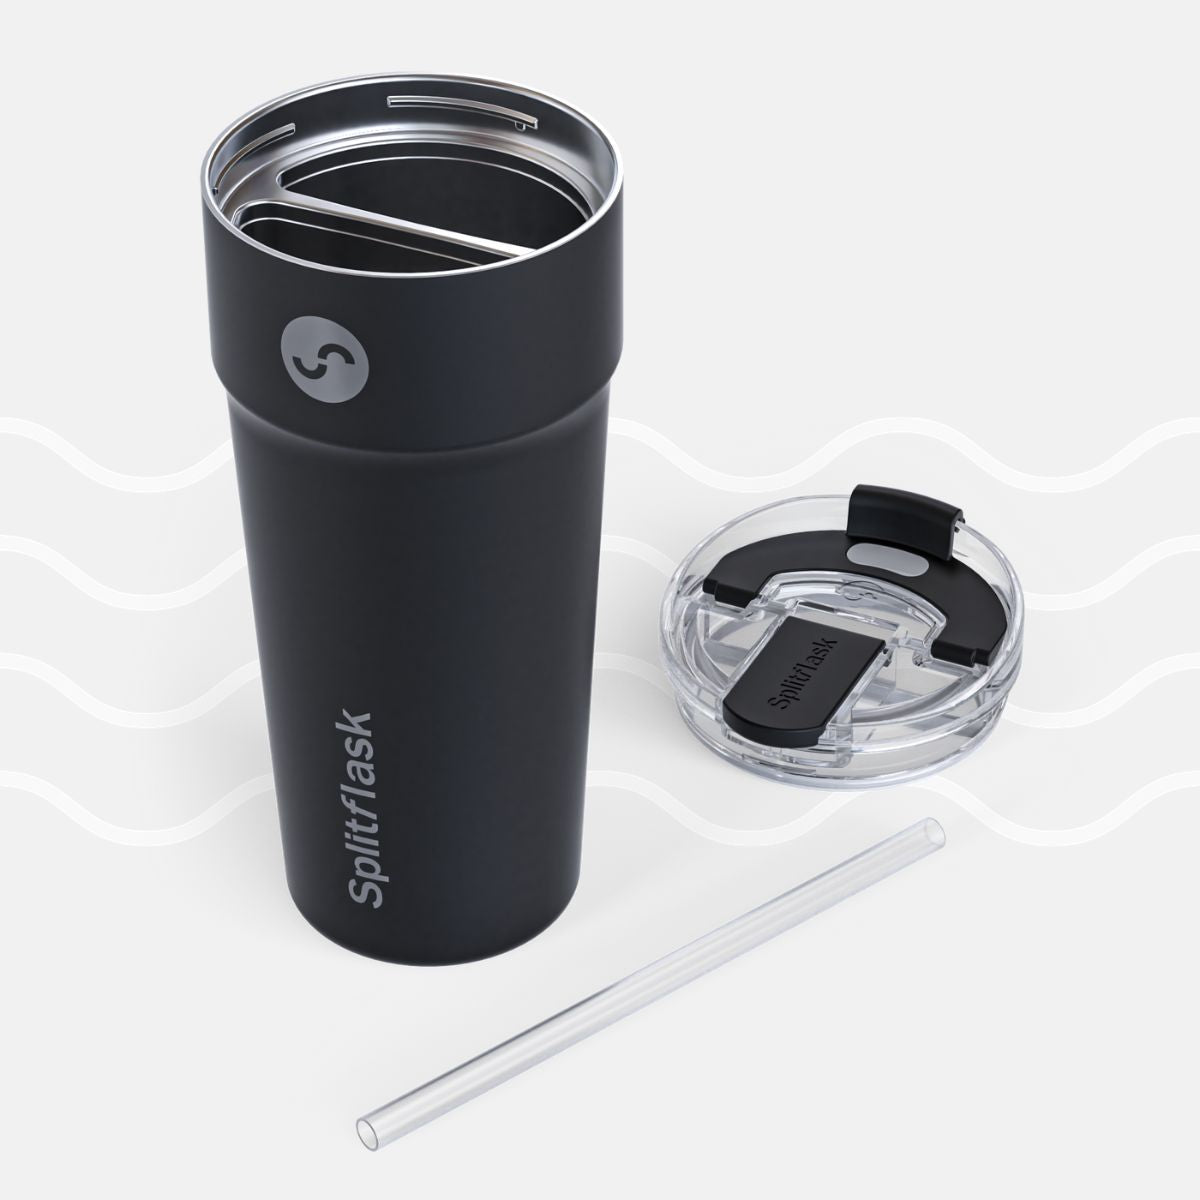 Splitflask opened: Best hot and cold tumbler